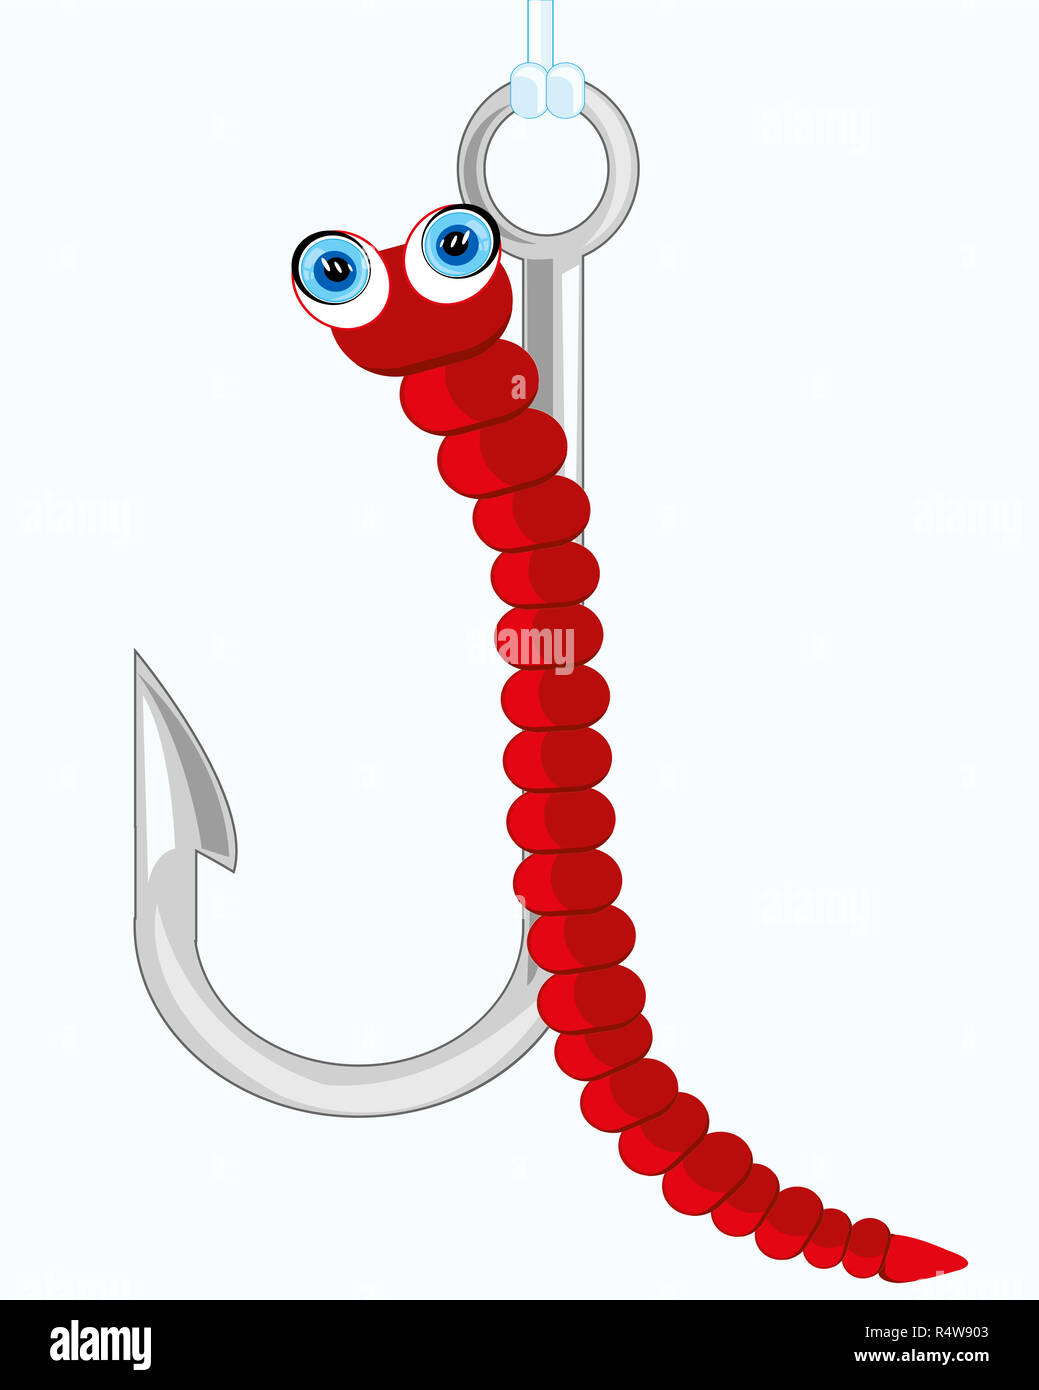 Worm on a hook. Stock Photo